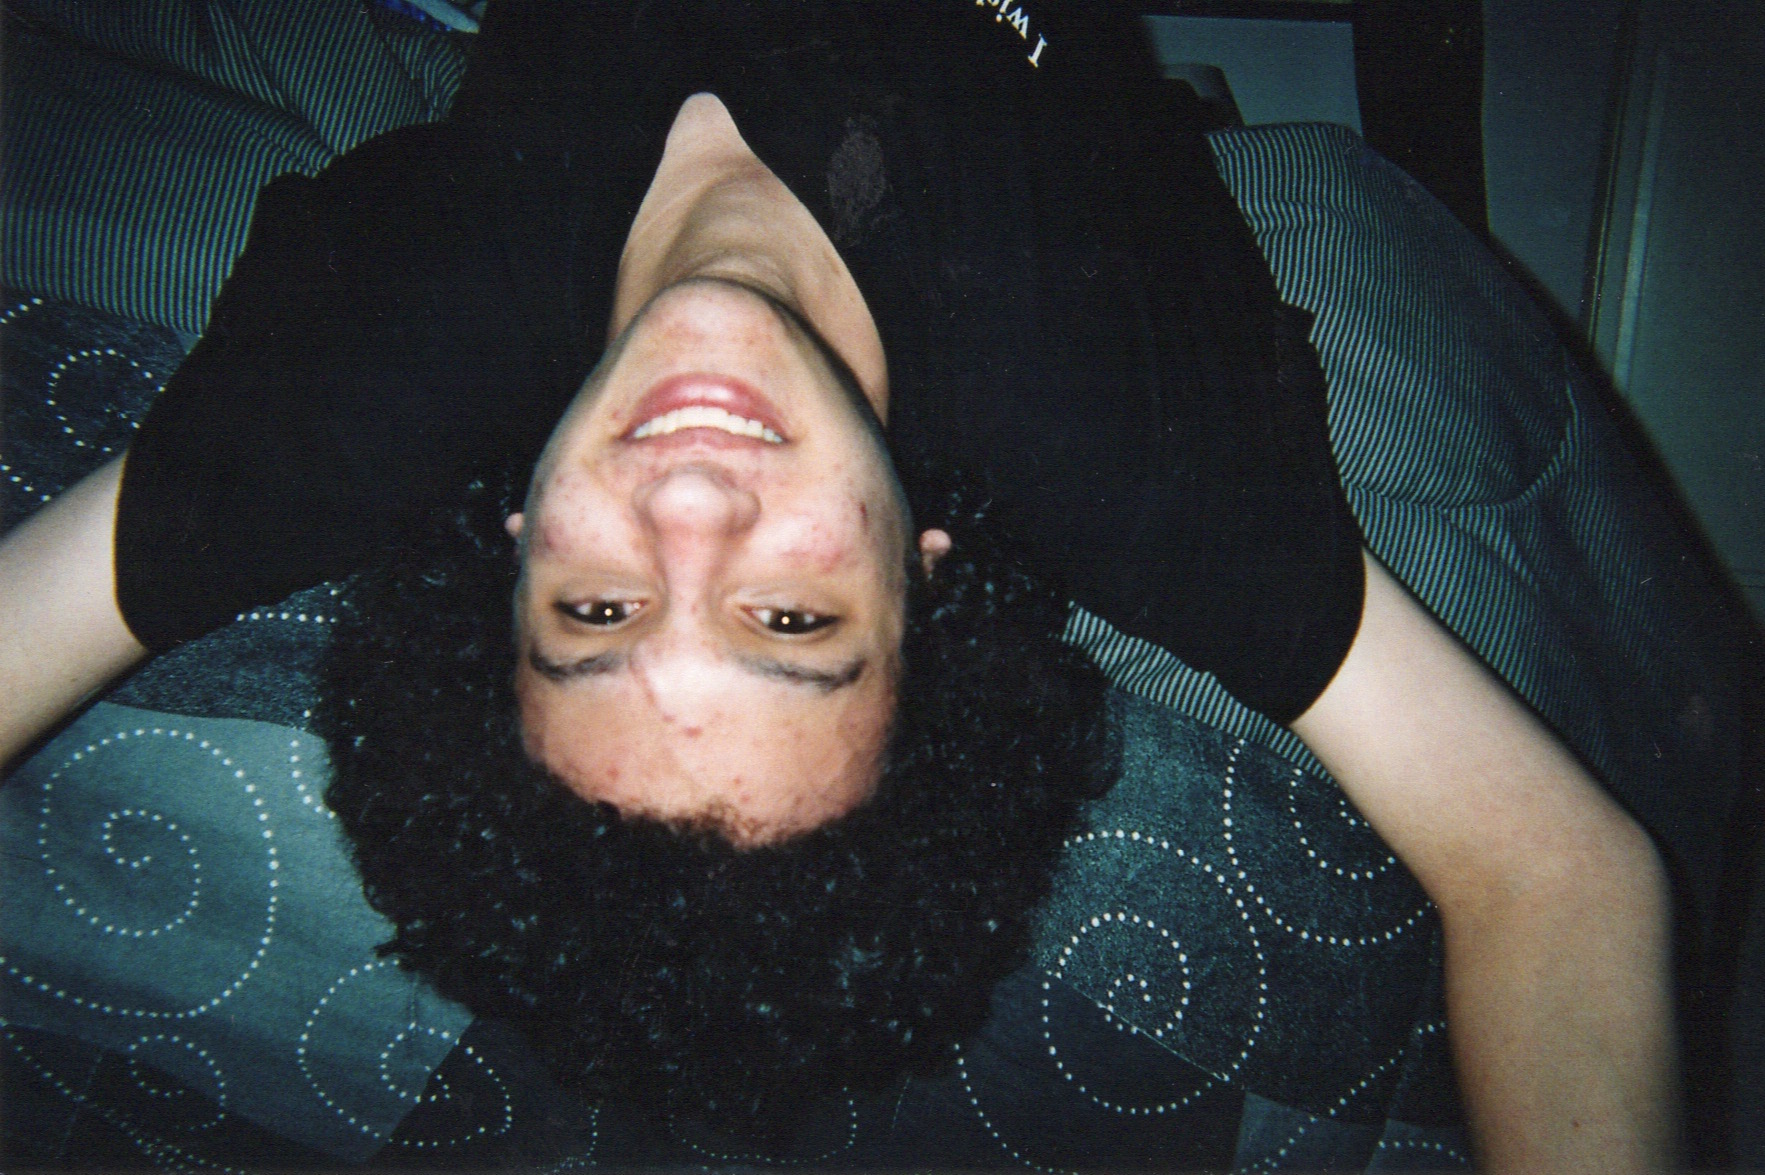 Matthew, smiling and lying upside down on my bed